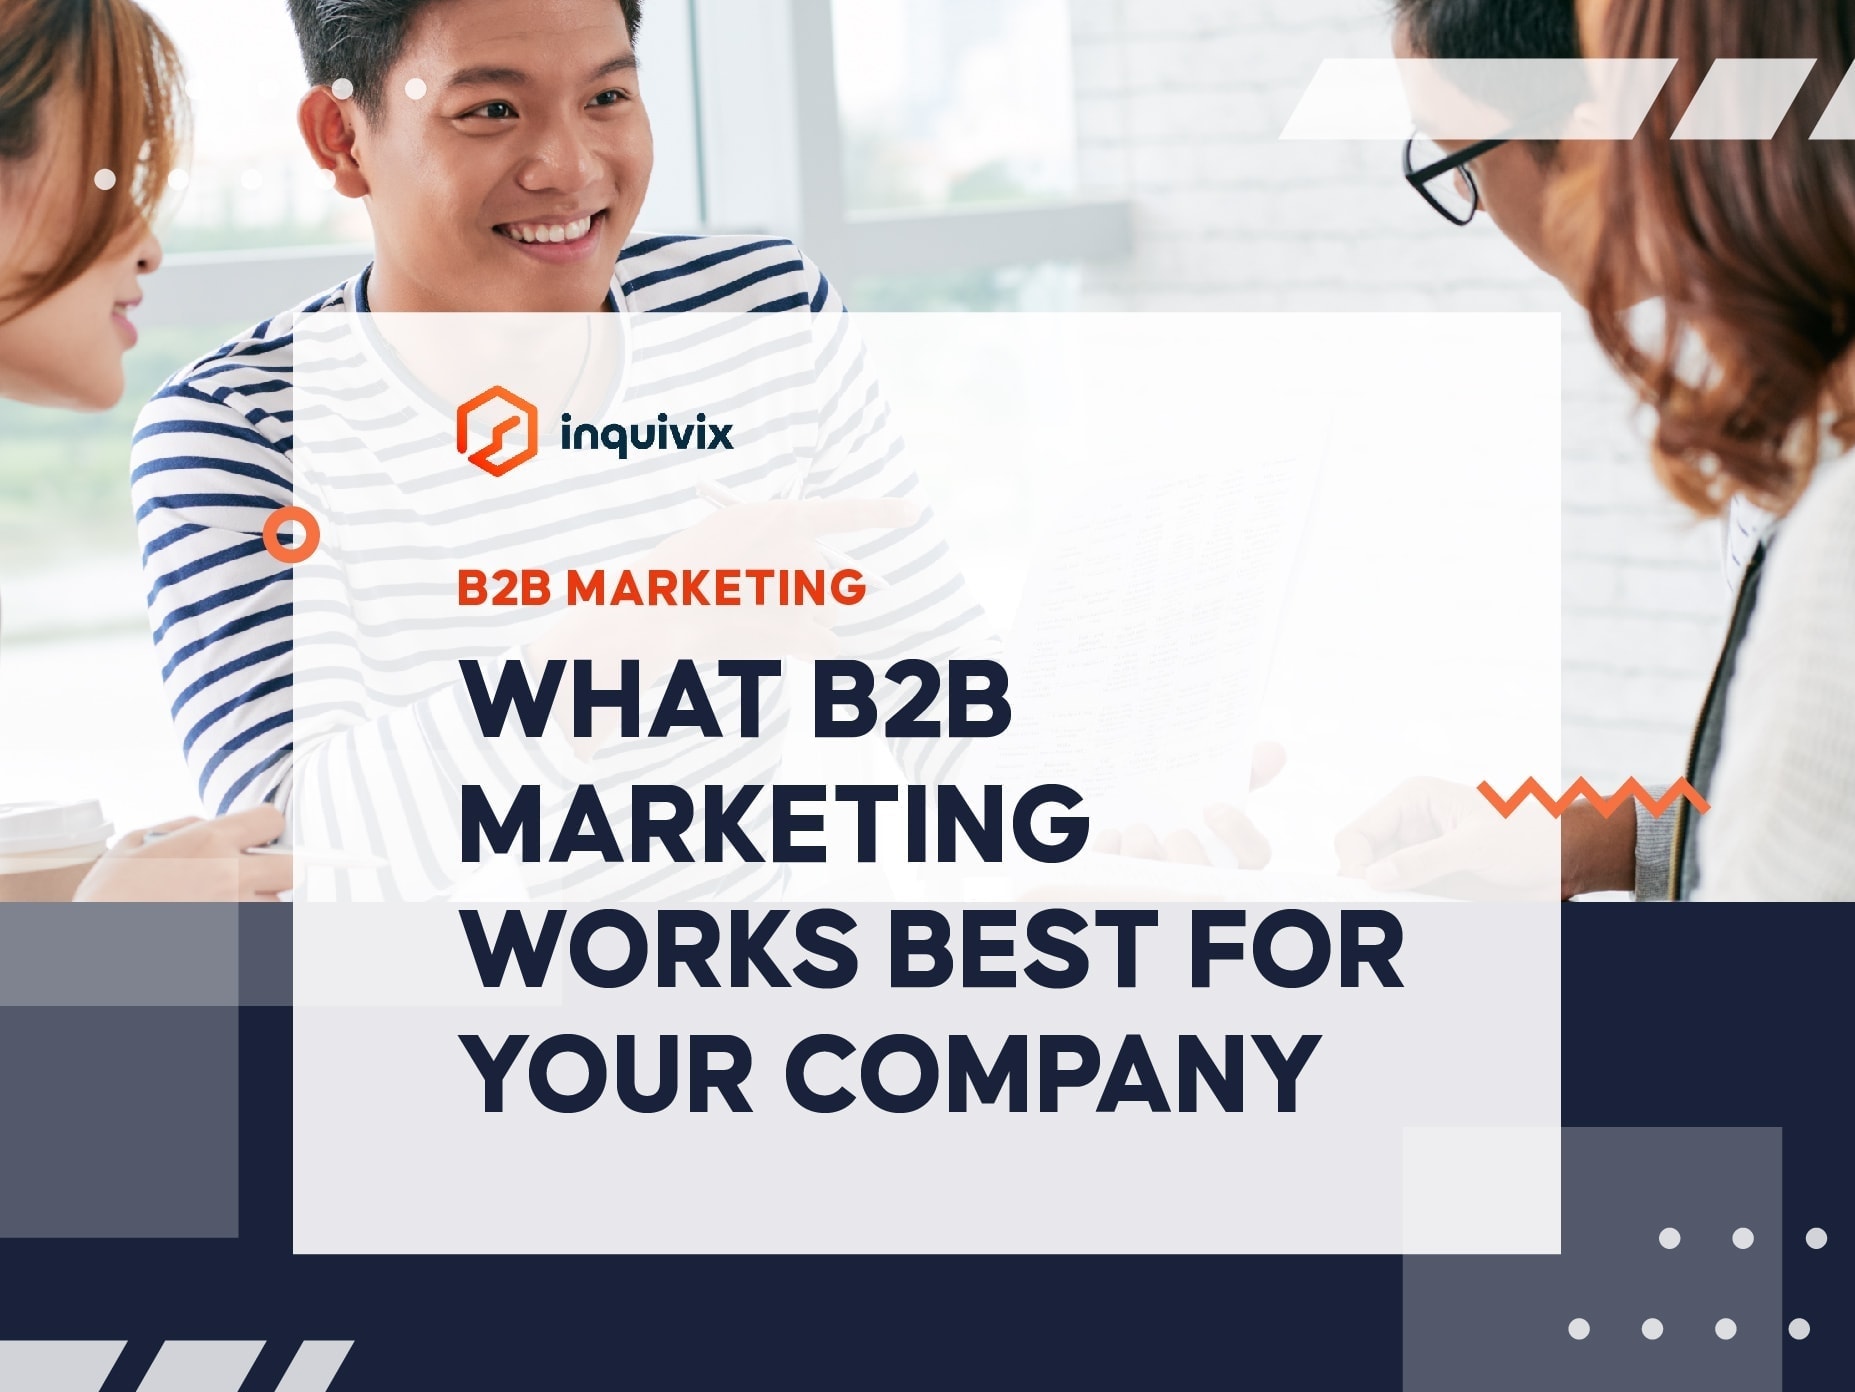 WHAT B2B MARKETING WORKS BEST FOR YOUR COMPANY